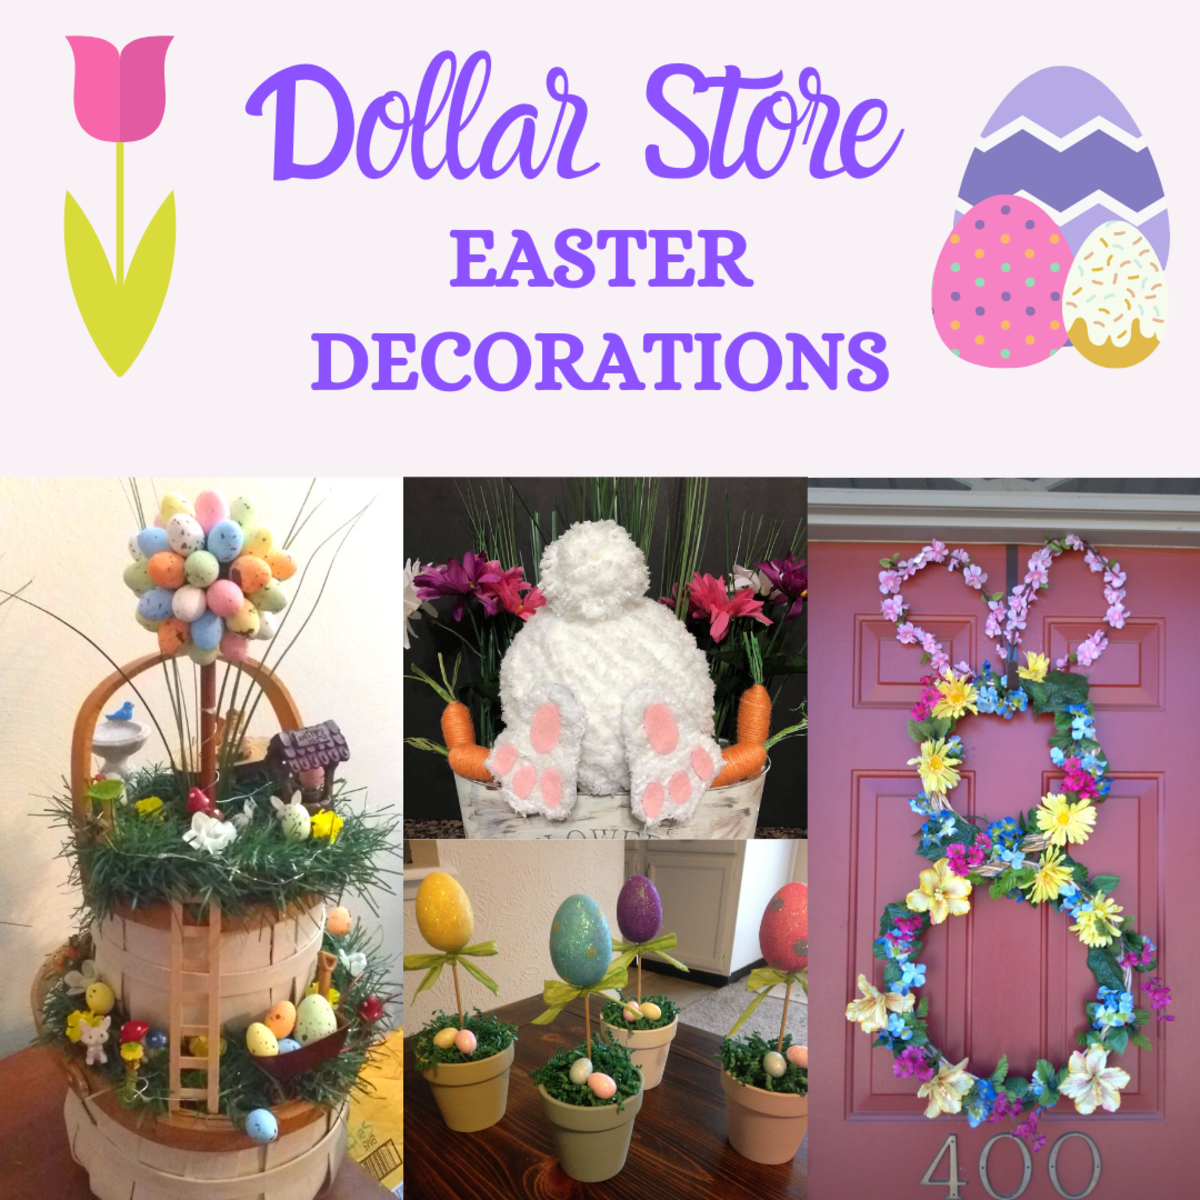 40+ DIY Dollar Store Easter Decorations: Egg-Citing Crafts!